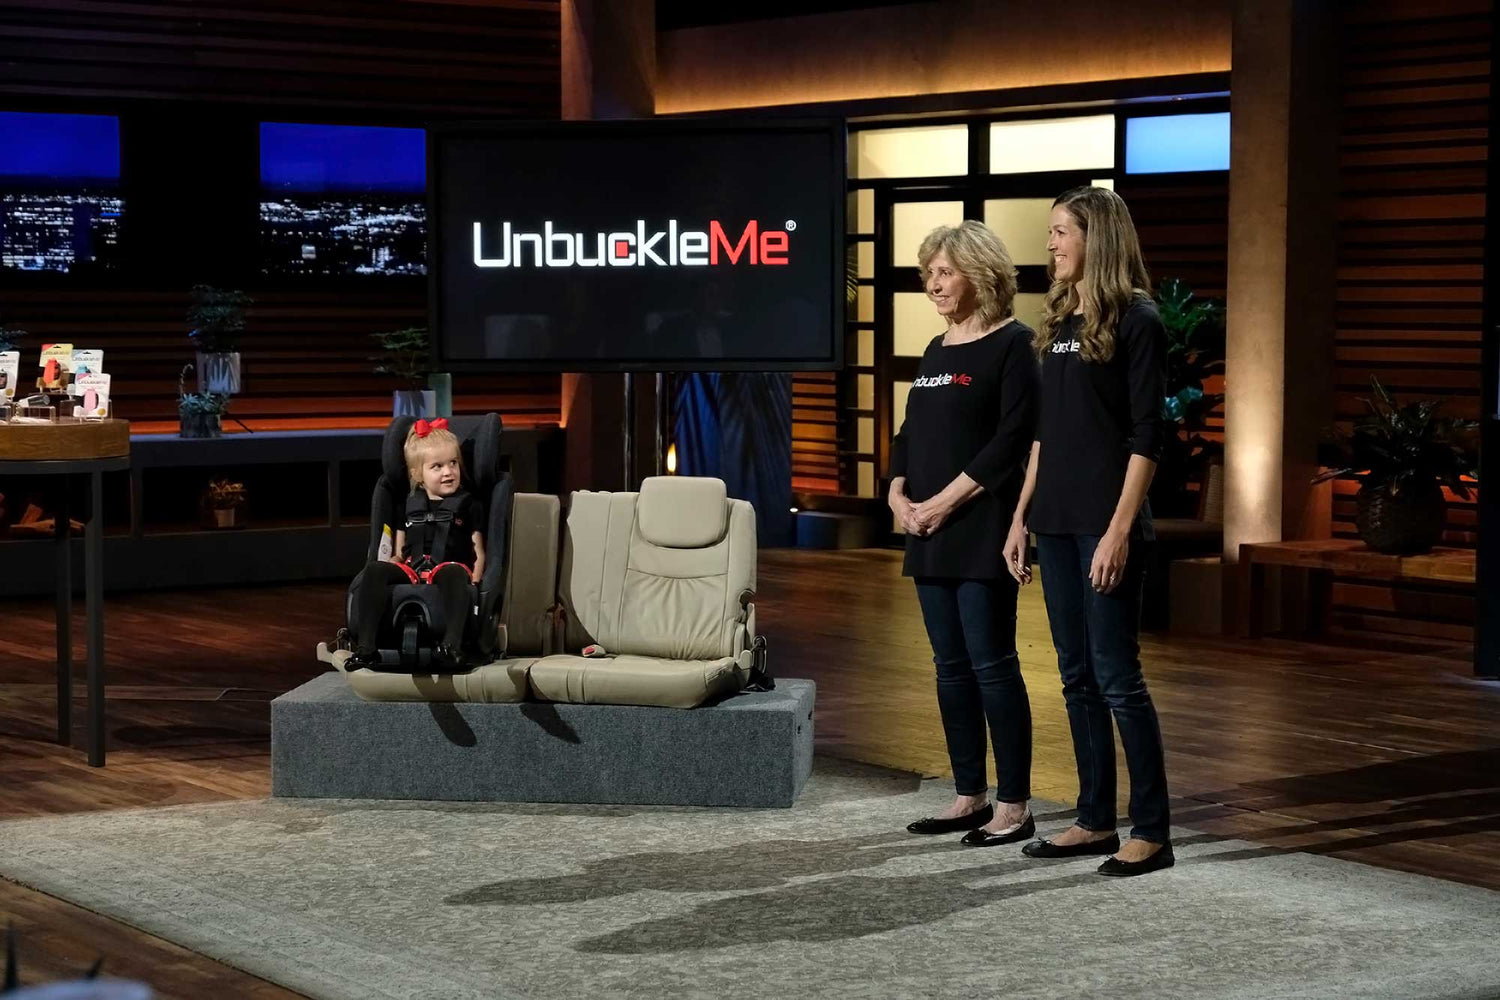 Photo of the two founder of UnbuckleMe, Becca and Barbara, presenting their product on Shark Tank TV show